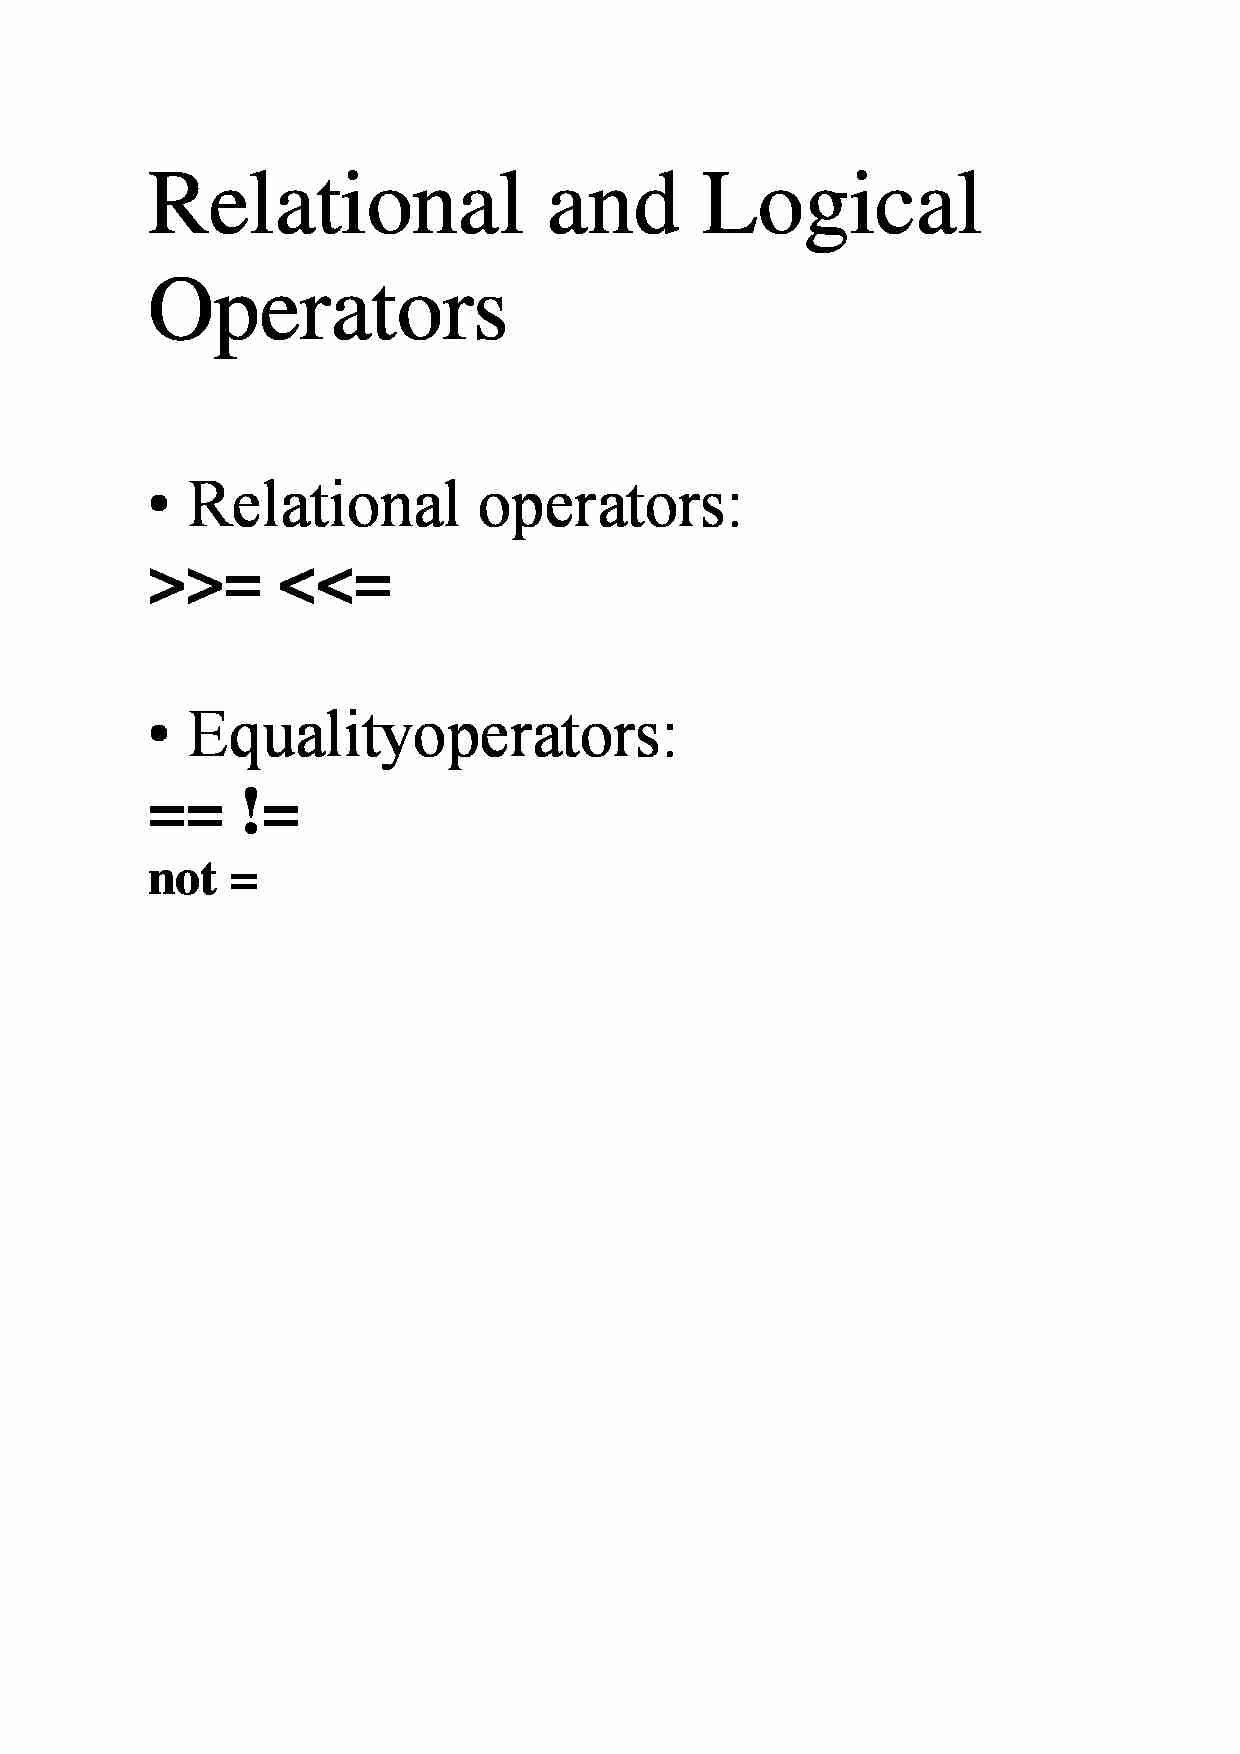 Relational and Logical Operators - strona 1